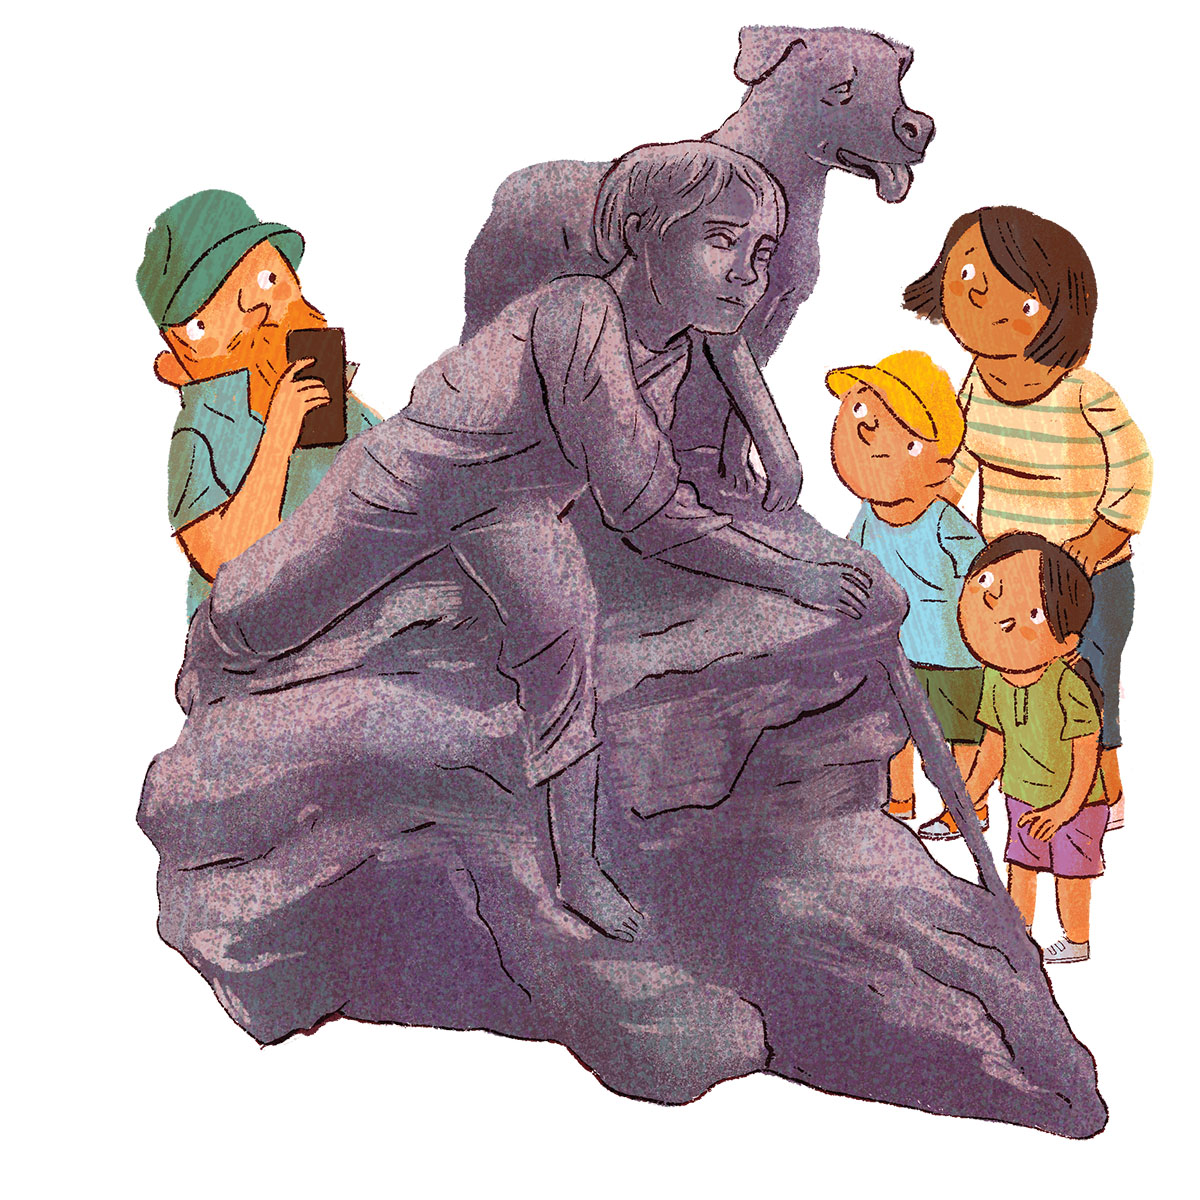 An illustration of a group of young people looking at a gray stone sculpture of a dog